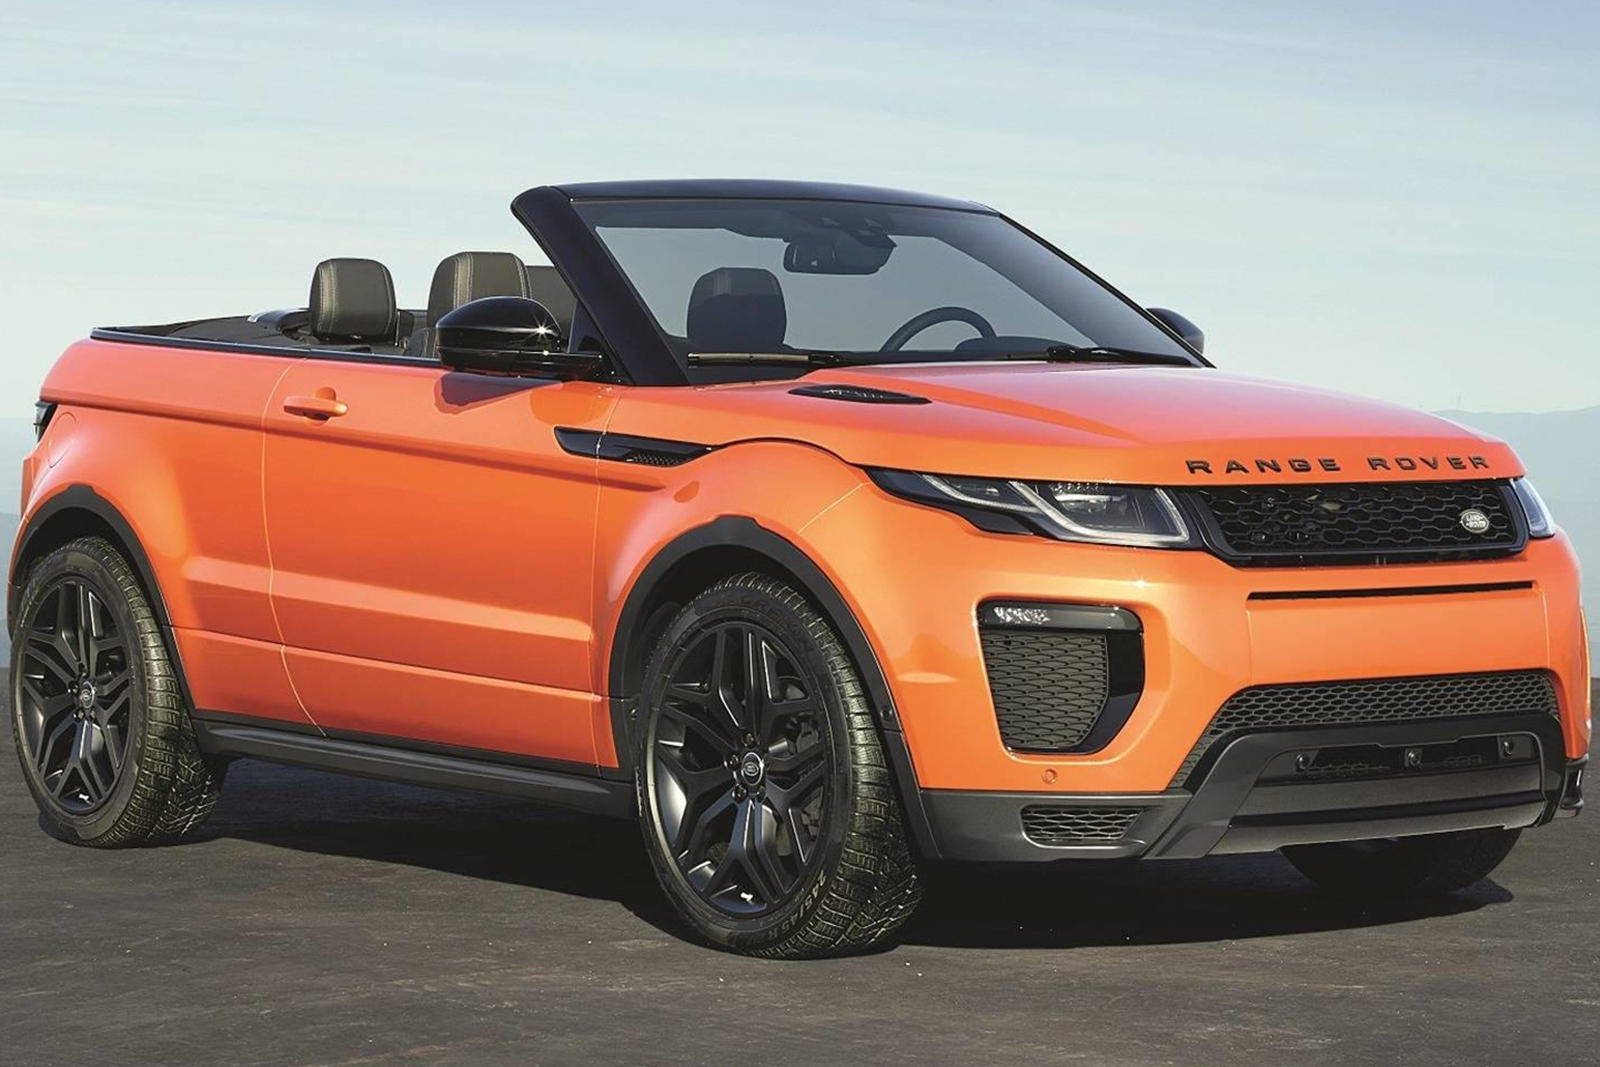 Range Rover Evoque Price List  : When The Range Rover Evoque Was First Introduced Back In 2010, It Impressed Buyers With Its Stylish Exterior Design And Compact Dimensions.